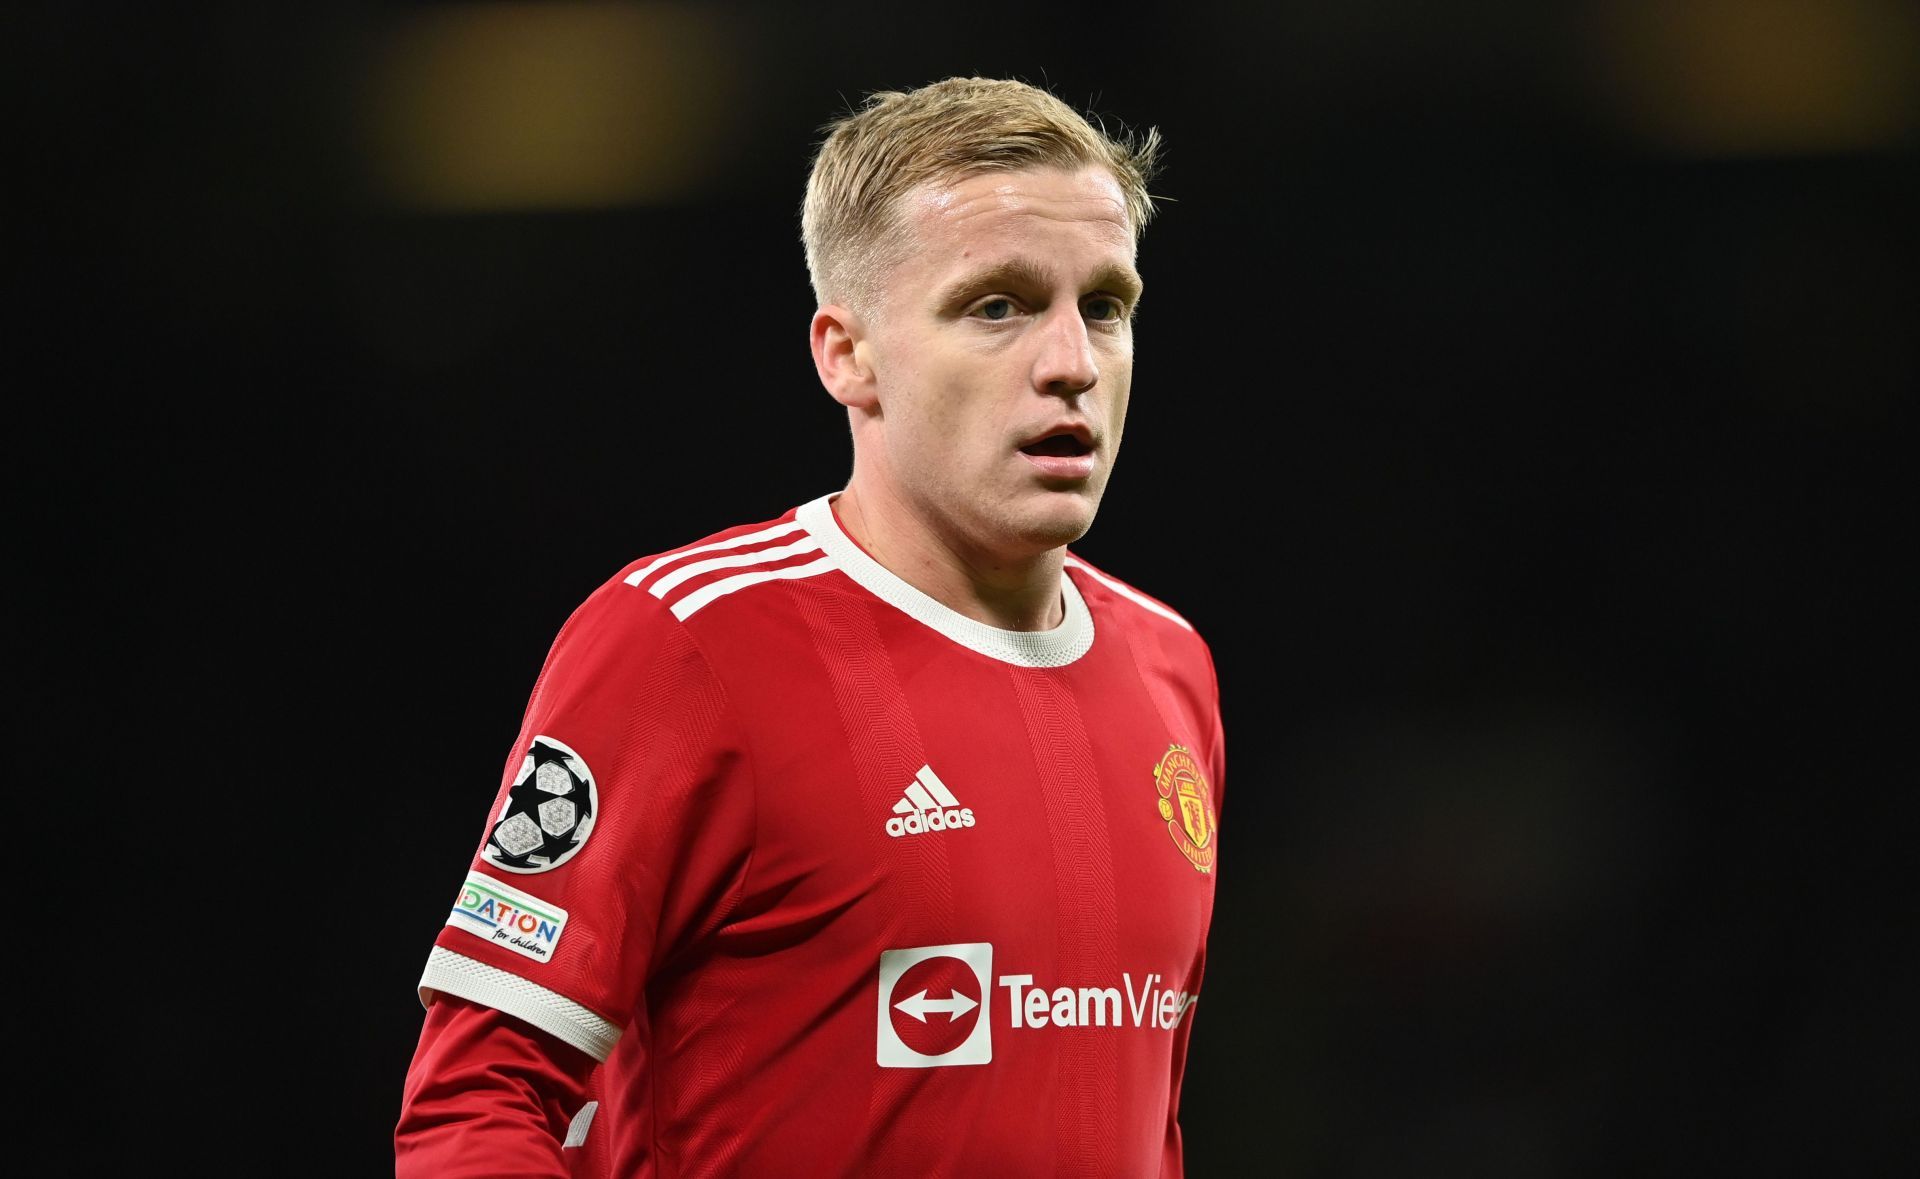 Everton have struck a deal with Manchester United to take Donny van de Beek on loan.